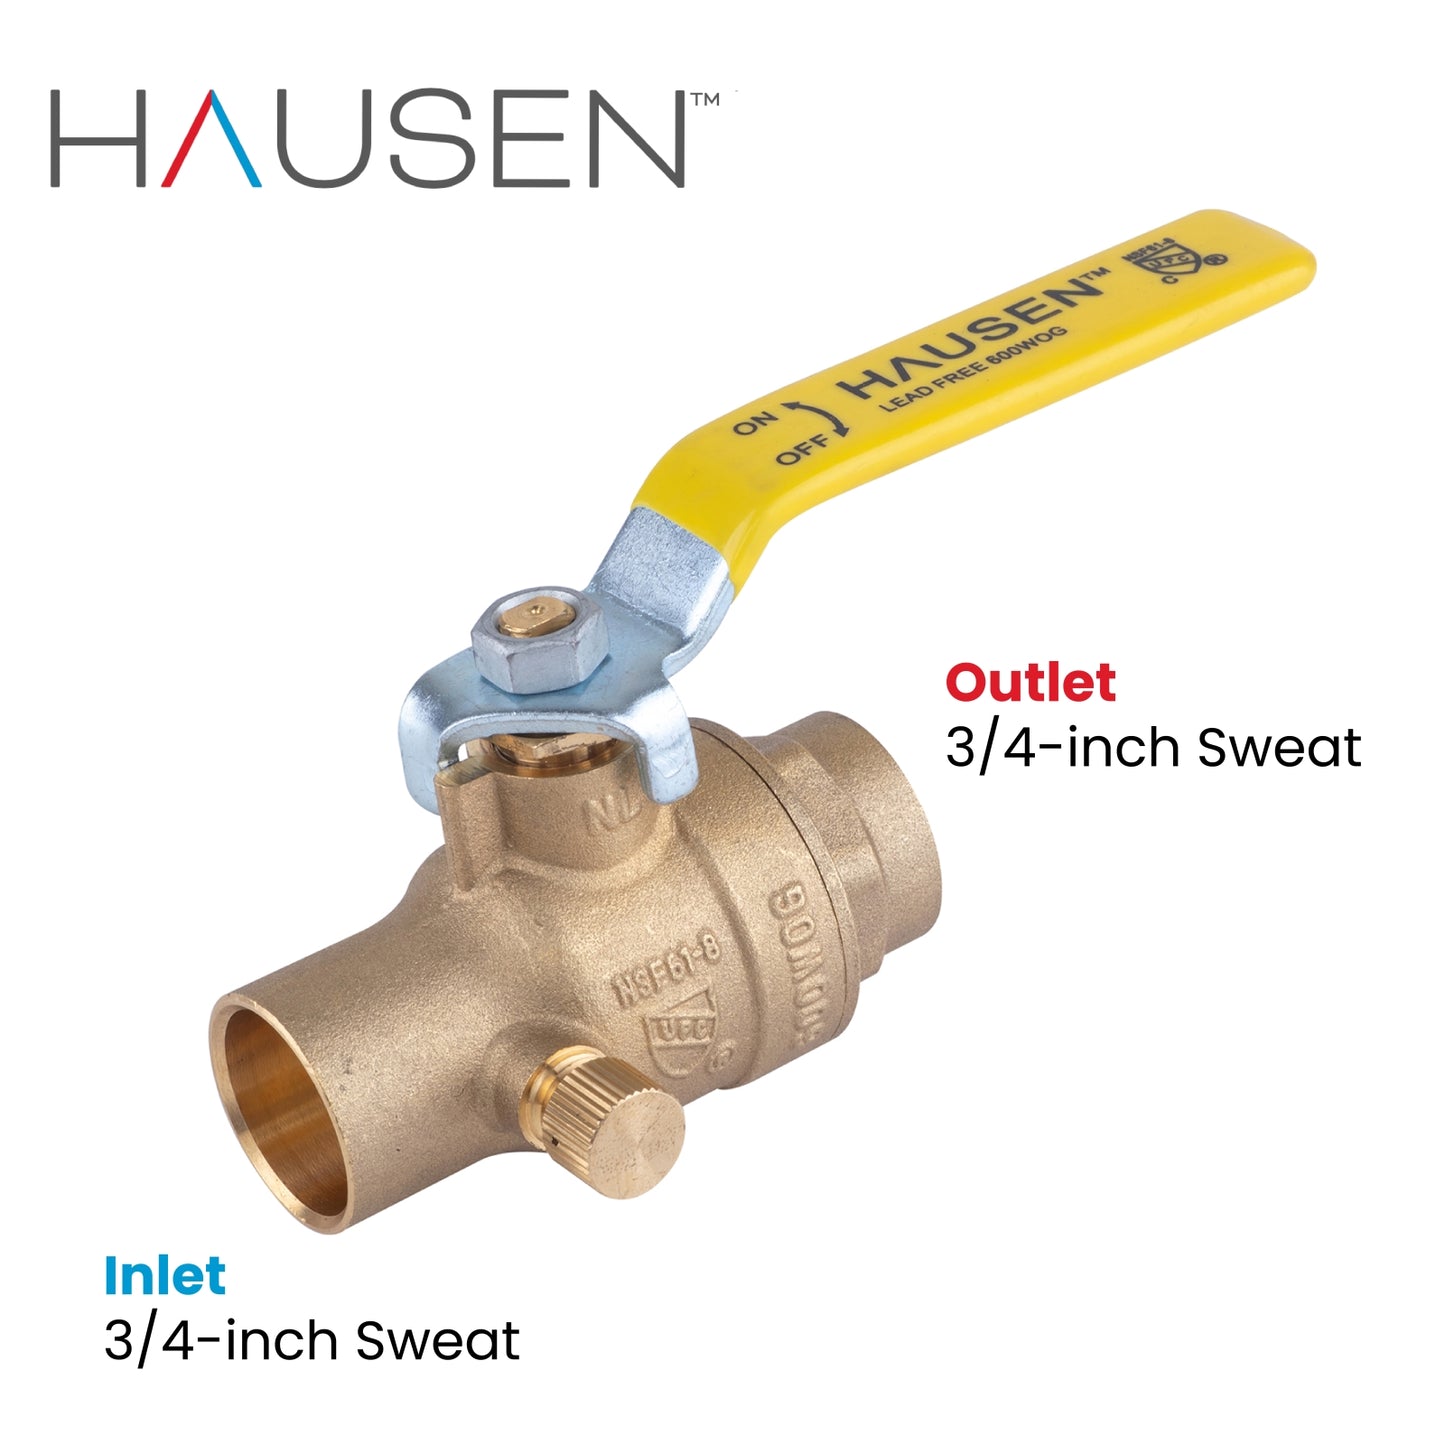 Hausen 3/4-inch Sweat x 3/4-inch Sweat Full Port Brass Ball Valve with Drain; Lead Free Forged Brass; Blowout Resistant Stem; For Use in Potable Water, Oil and Gas Distribution Systems, 5-Pack